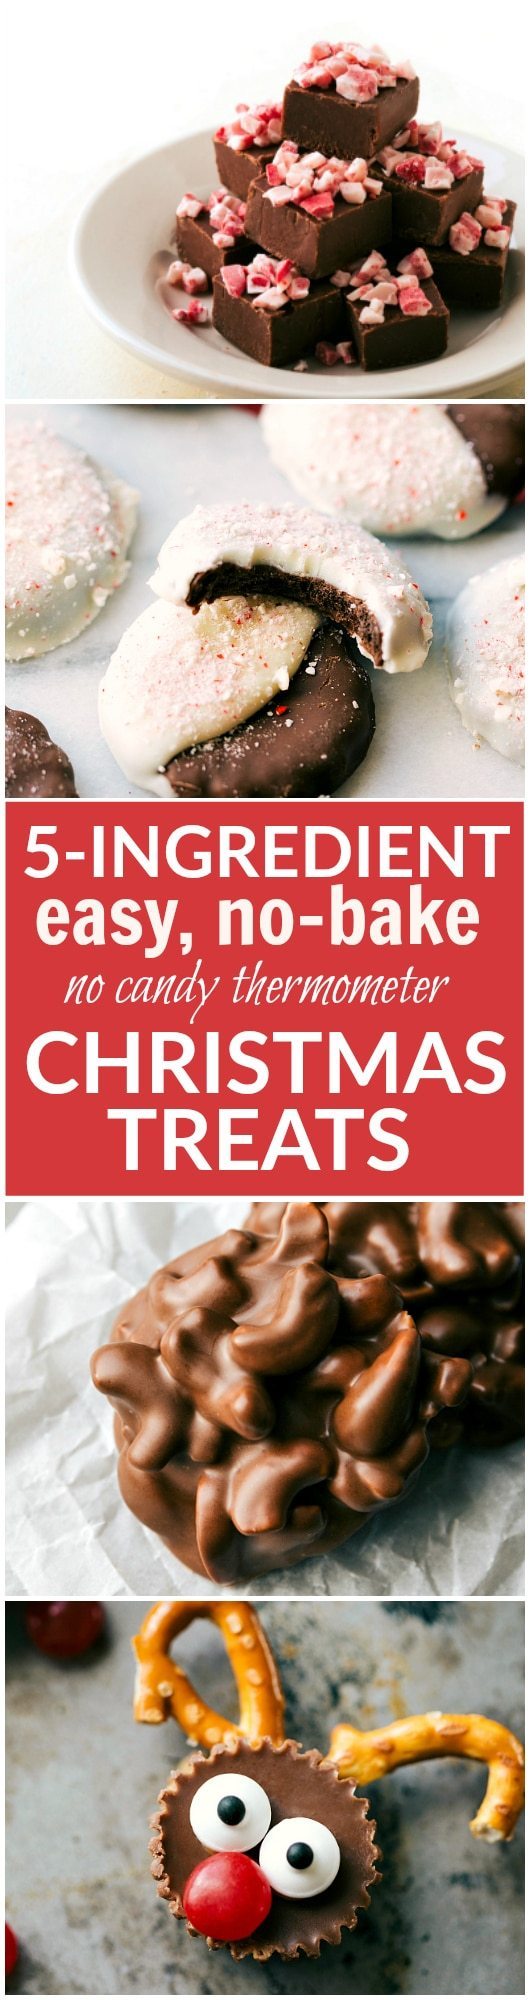 Four different easy, quick, and fool-proof Christmas treats that the kids can help with! Perfect for gift-giving and enjoying with the family. Peppermint bark cookies, toffee cashew clusters, microwave fudge, and rudolph bites! Recipes via chelseasmessyapron.com